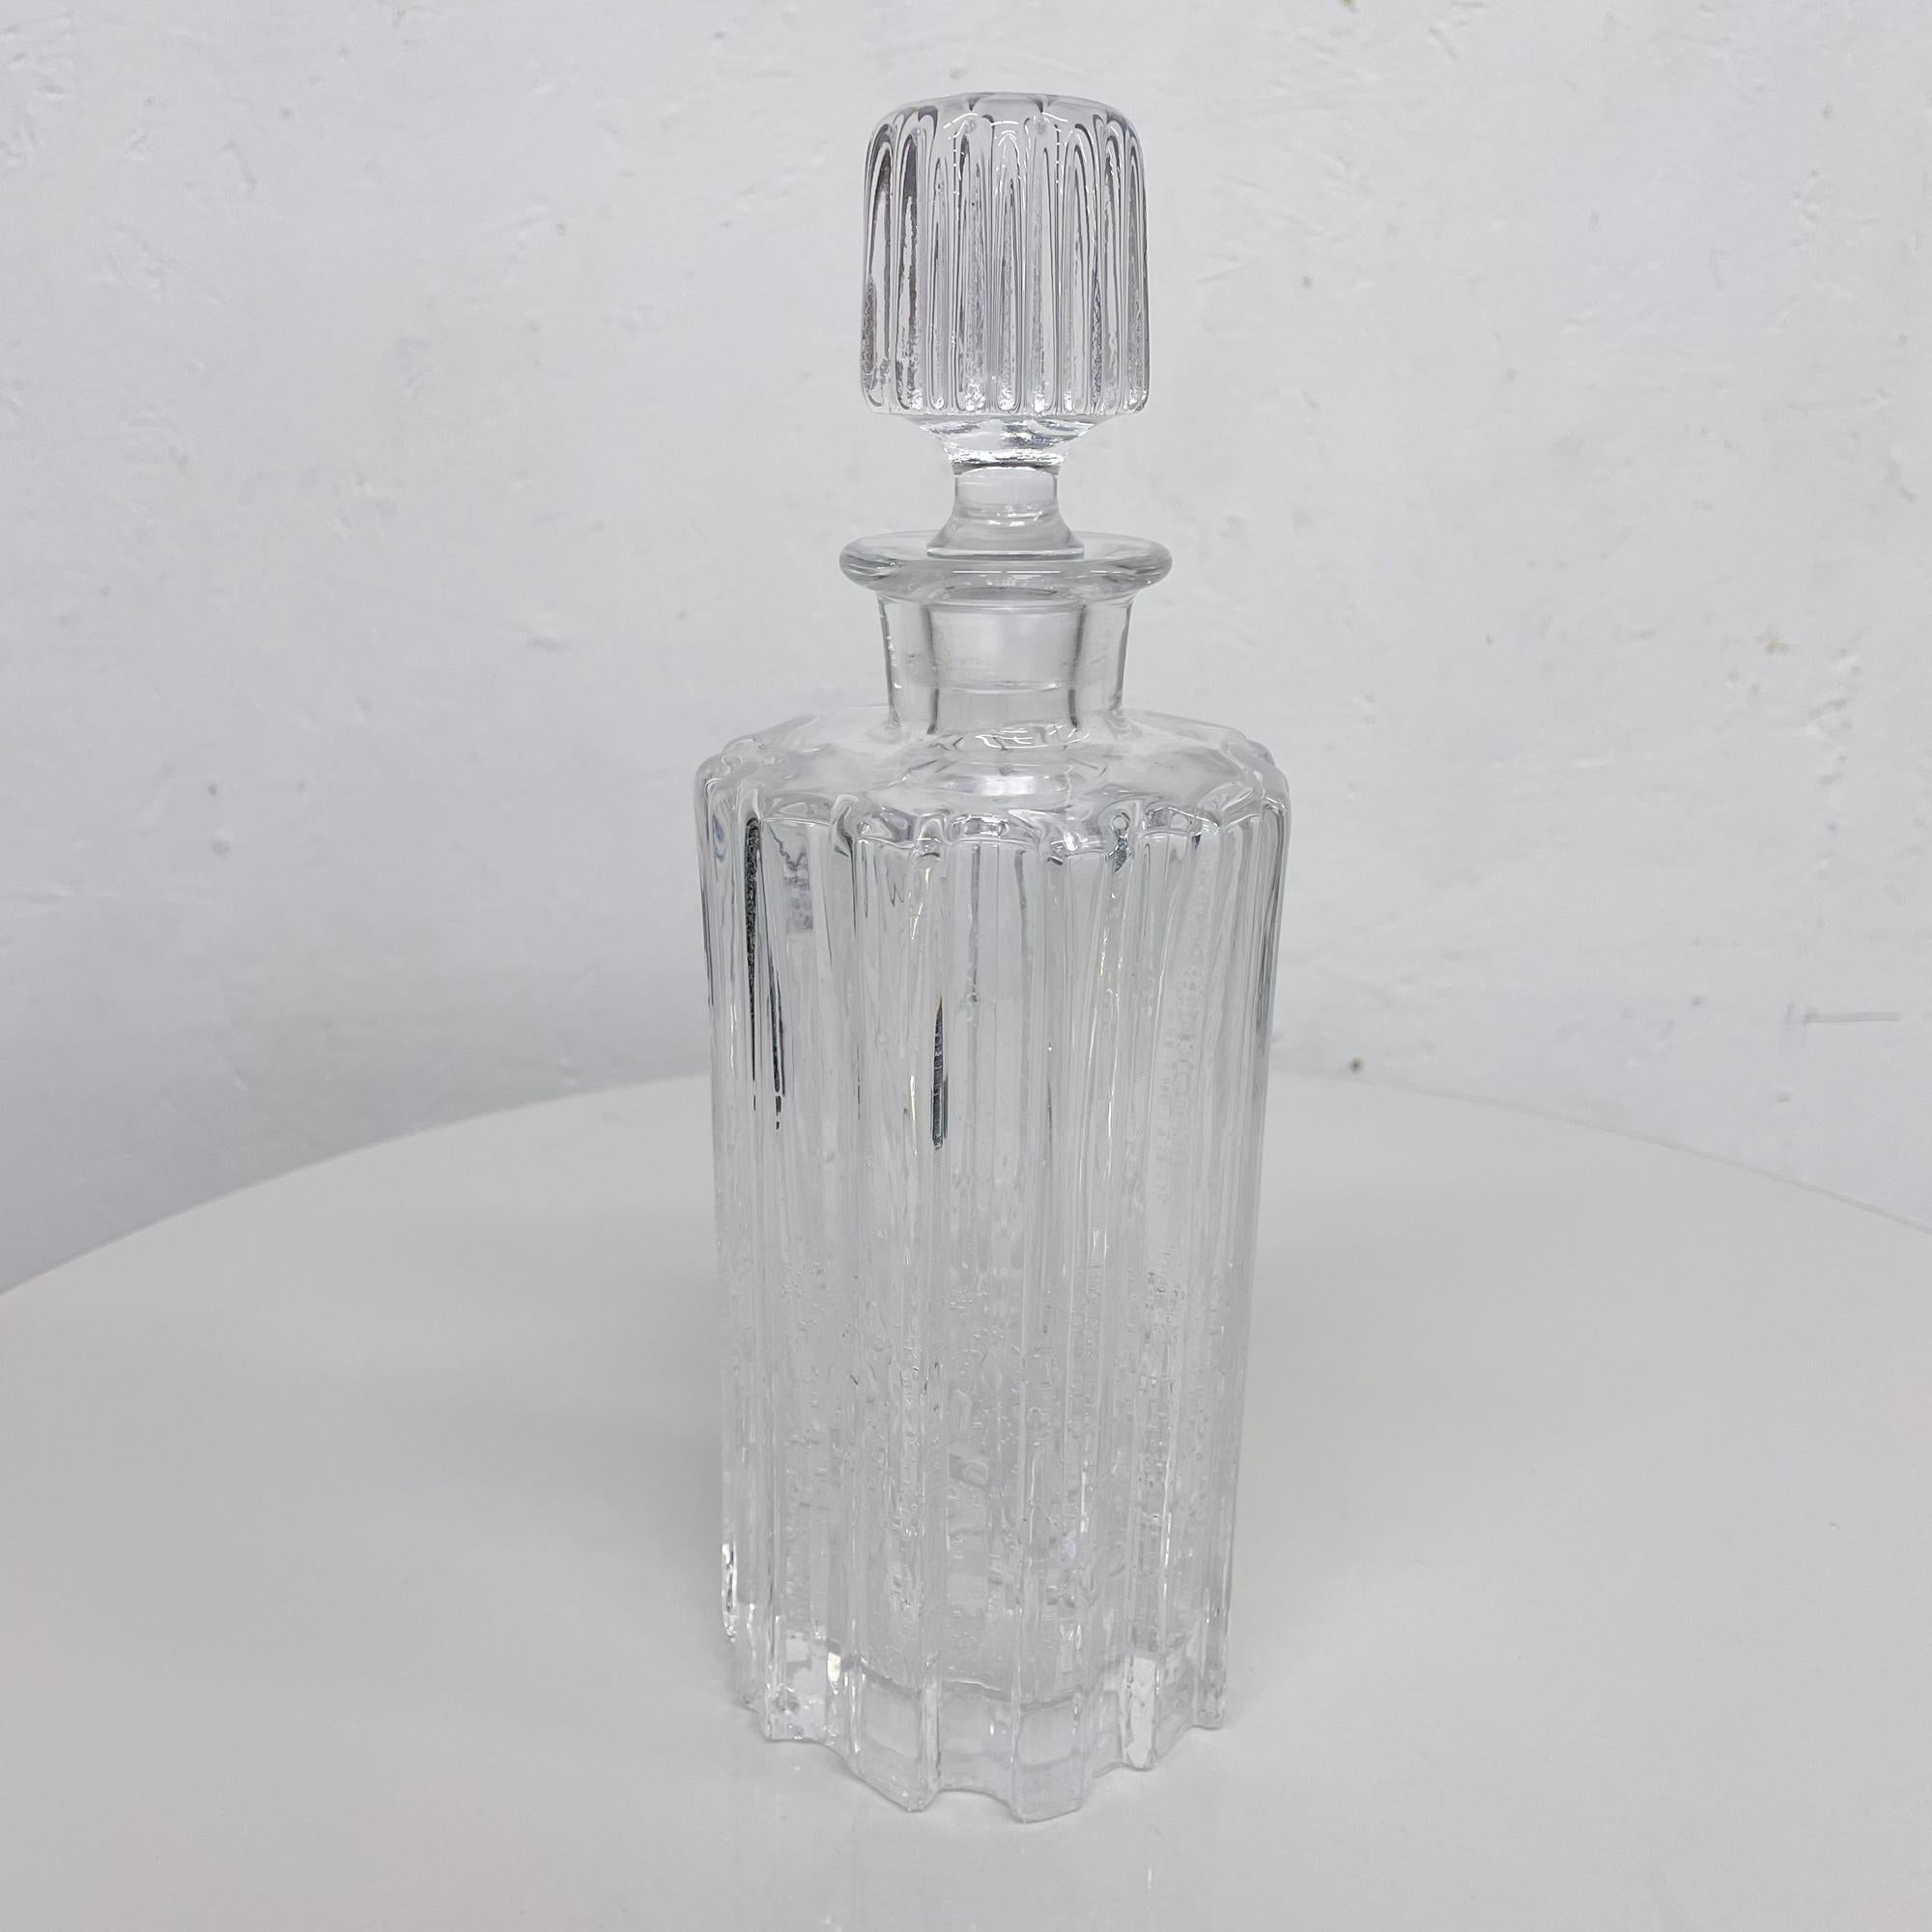 Decanter
Handsome mid-century ribbed glass carafe bottle decanter Modern Brutalist design with controlled bubbles
In the style of Tapio Wirkkala Finland
Includes matching lid-stopper -it has a small nick, please refer to images.
Measures: 10.63